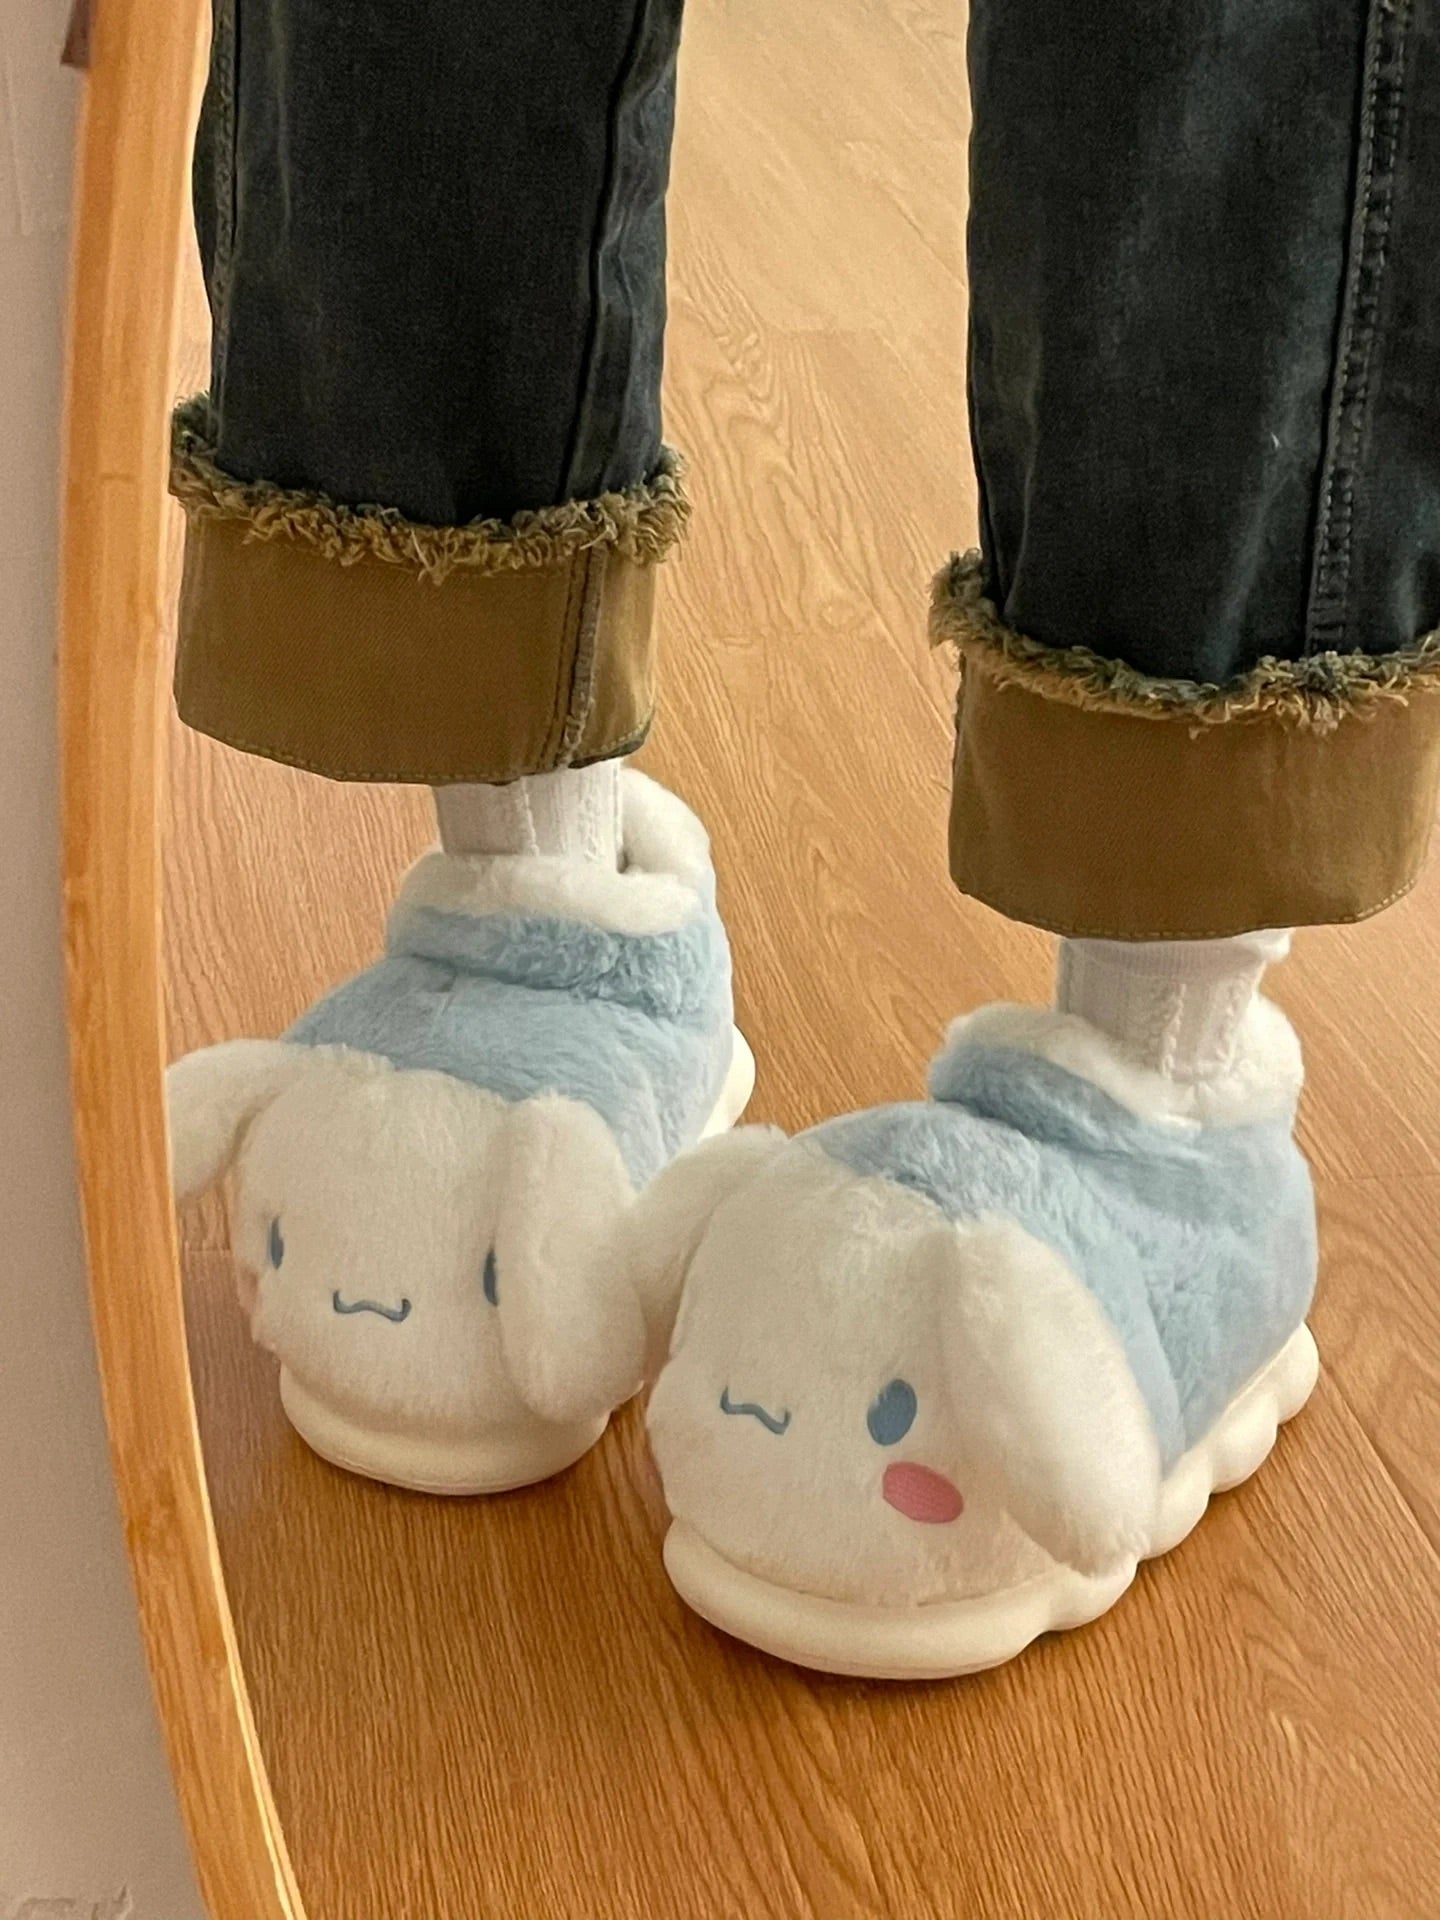 Sanrio slippers warm thick sole slippers